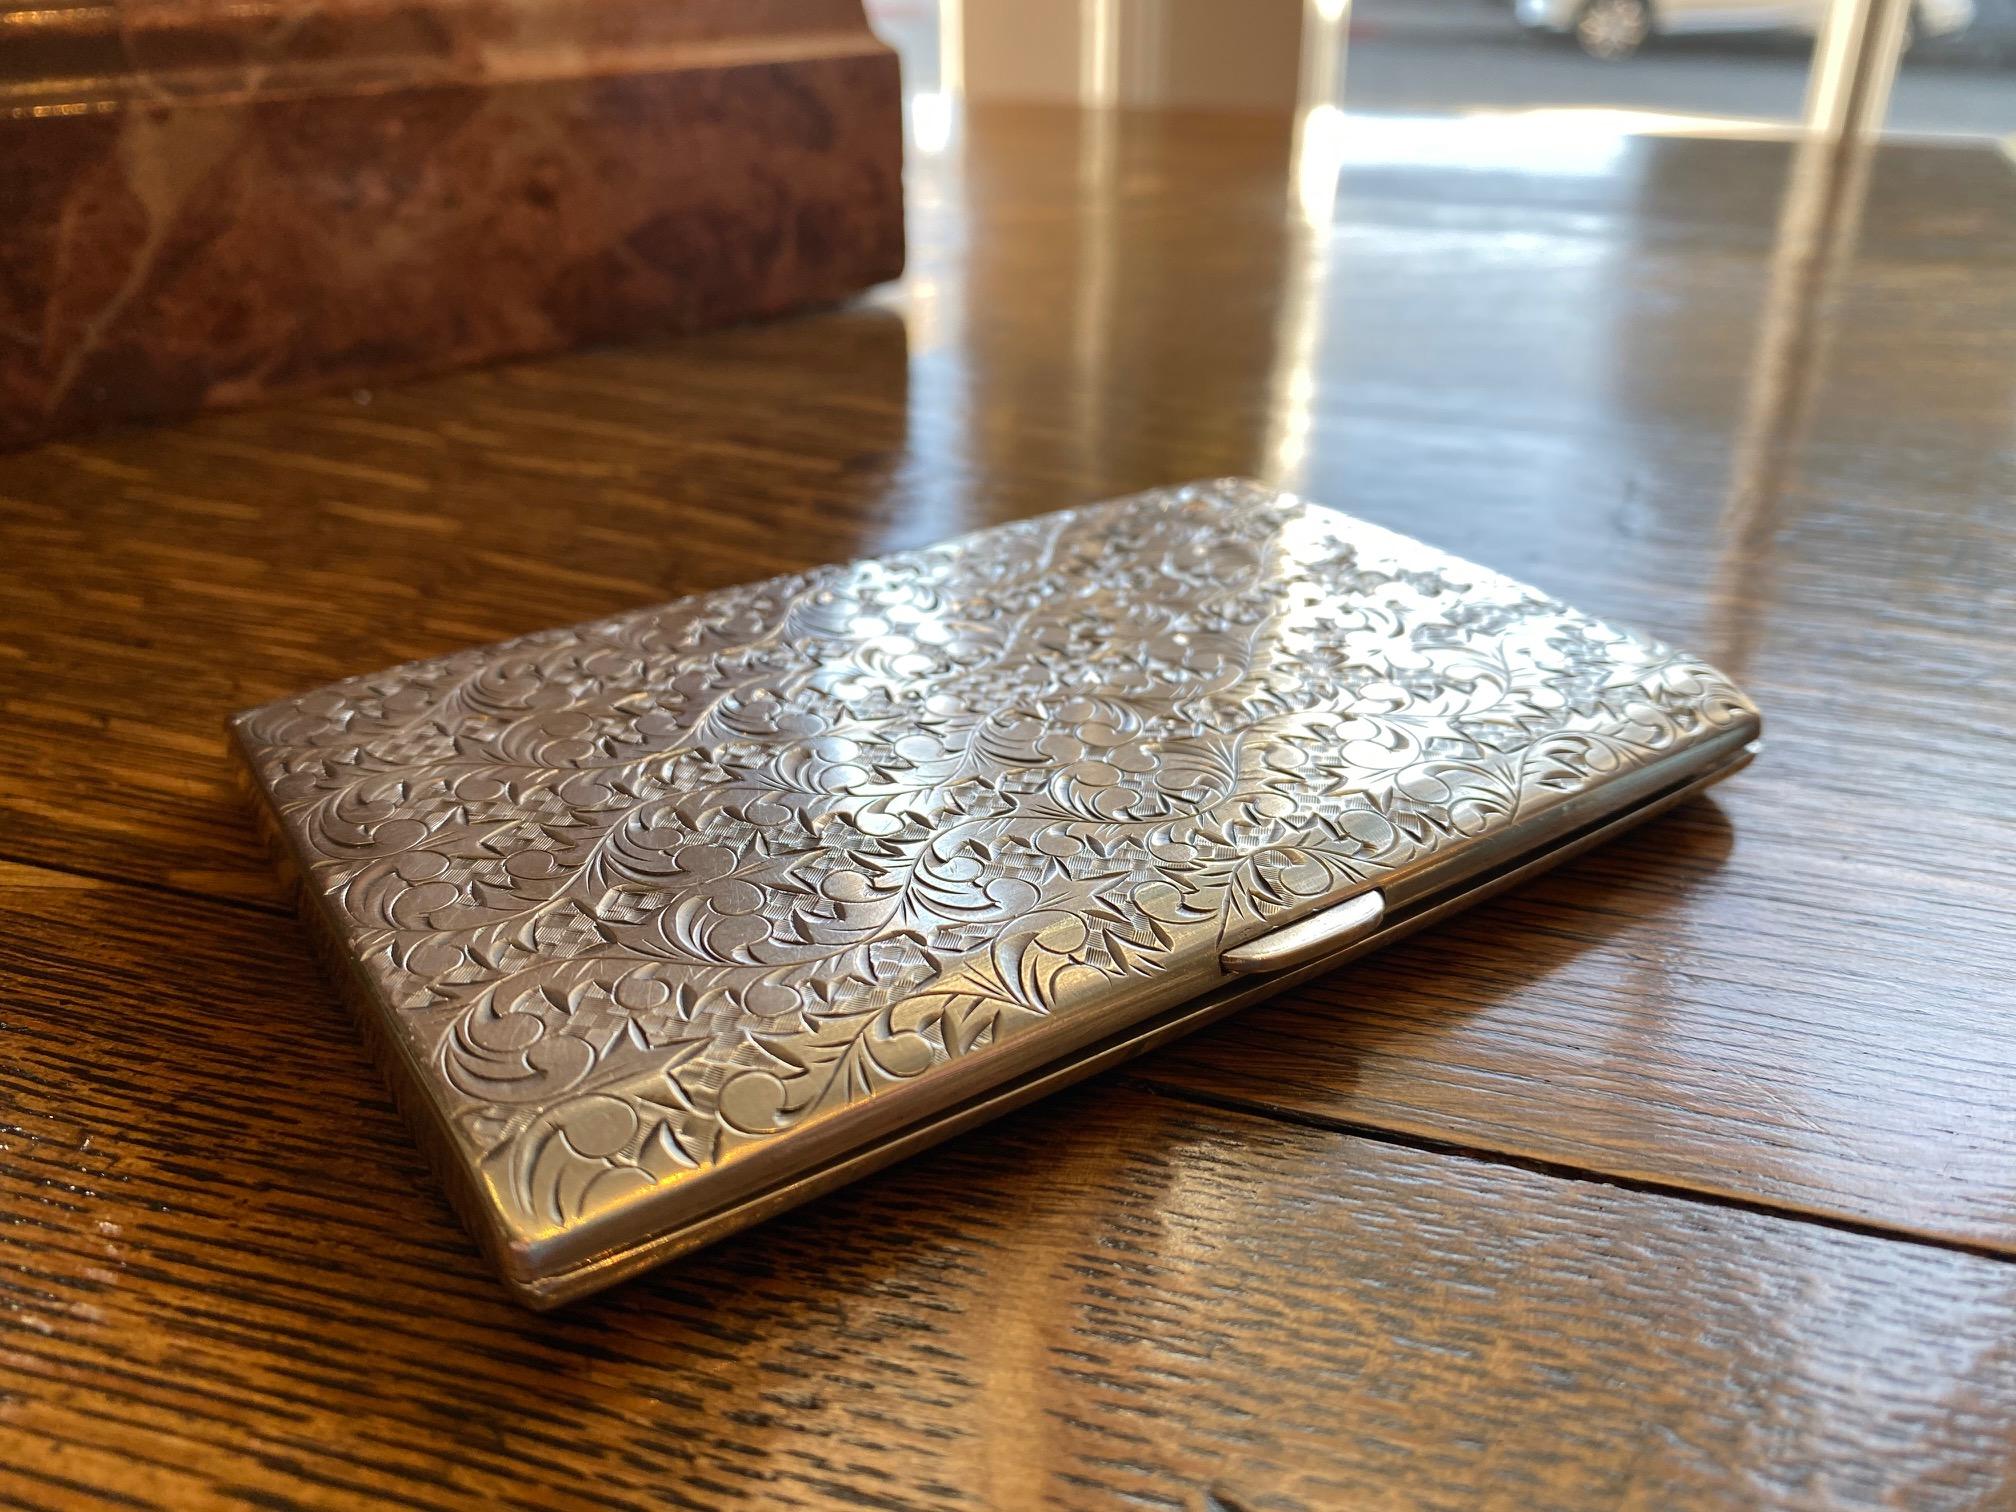 A magnificent and extremely rare sterling silver engraved cigarette case holder. Perfect gift for any collector, can be used as personal or business cards case as a special gift idea for the holiday season or as a decorative object biblot on a desk.